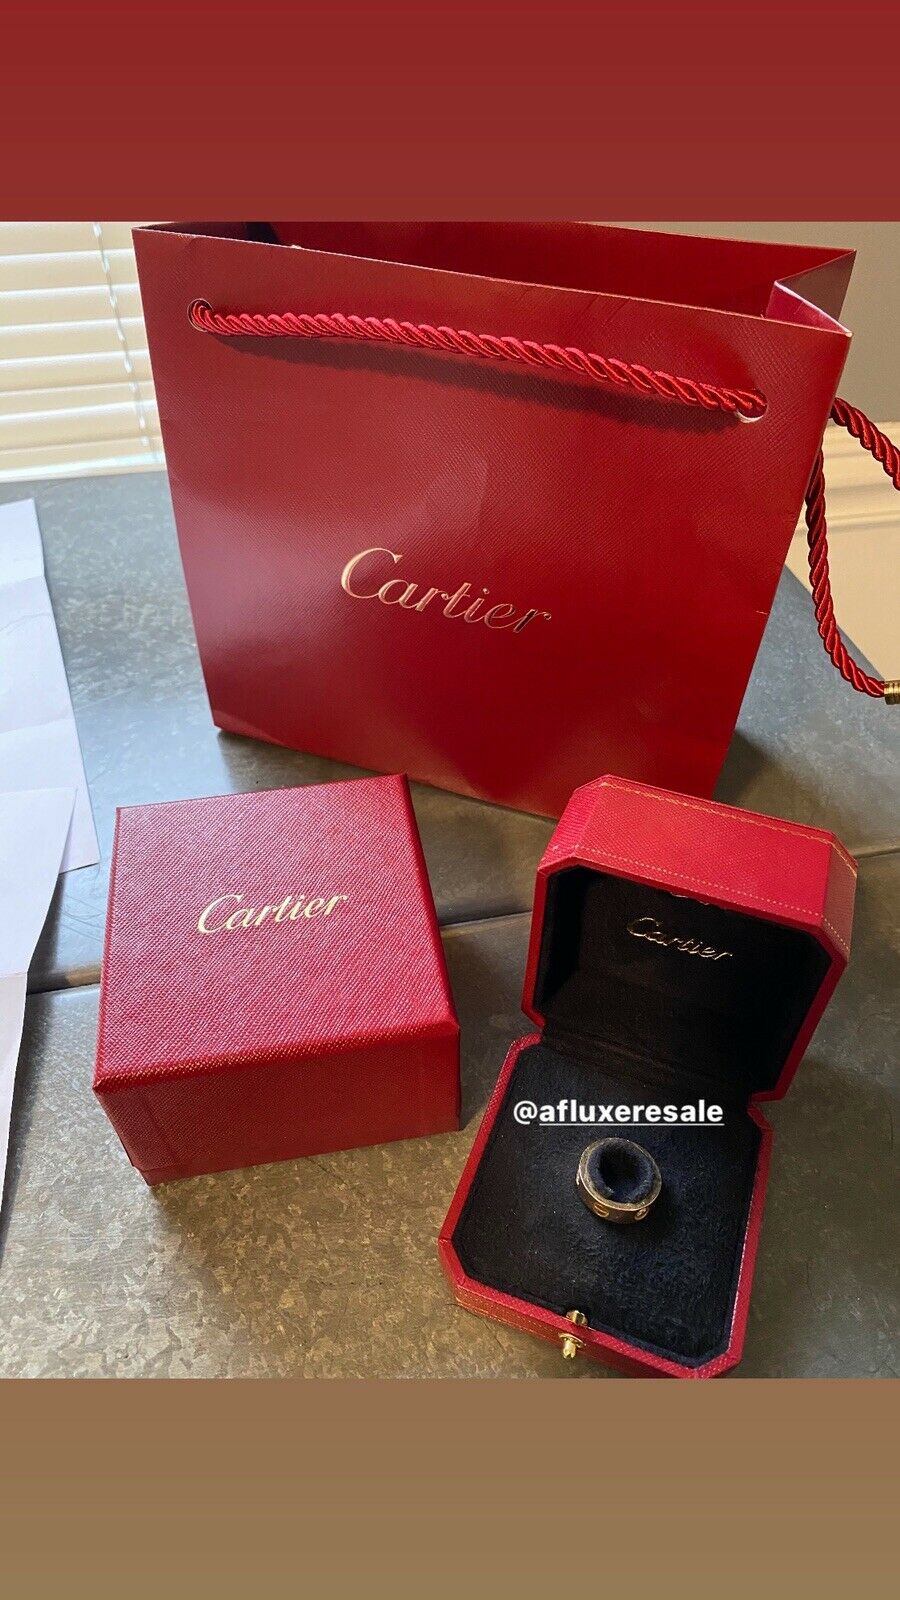 Three Diomonds 18K Yellow Gold Cartier Love Ring size 51, 8.7g